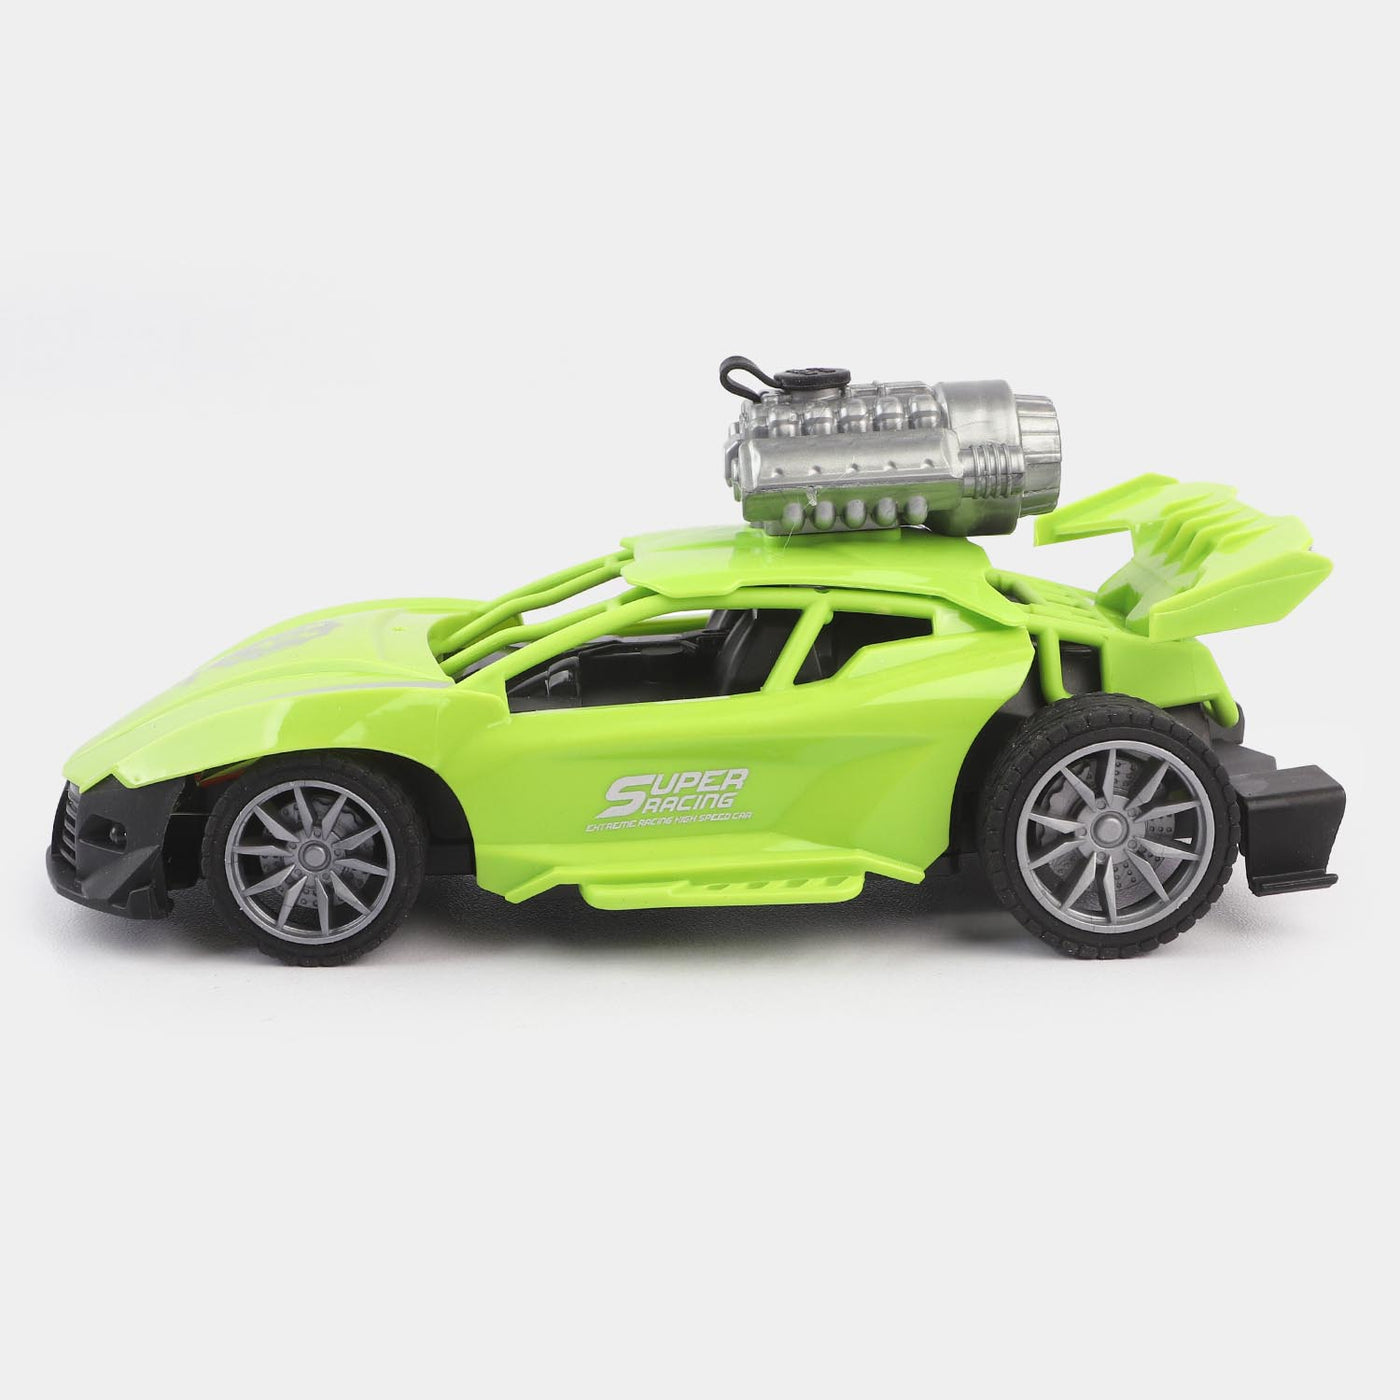 Remote Control With Spray Function Car For Kids